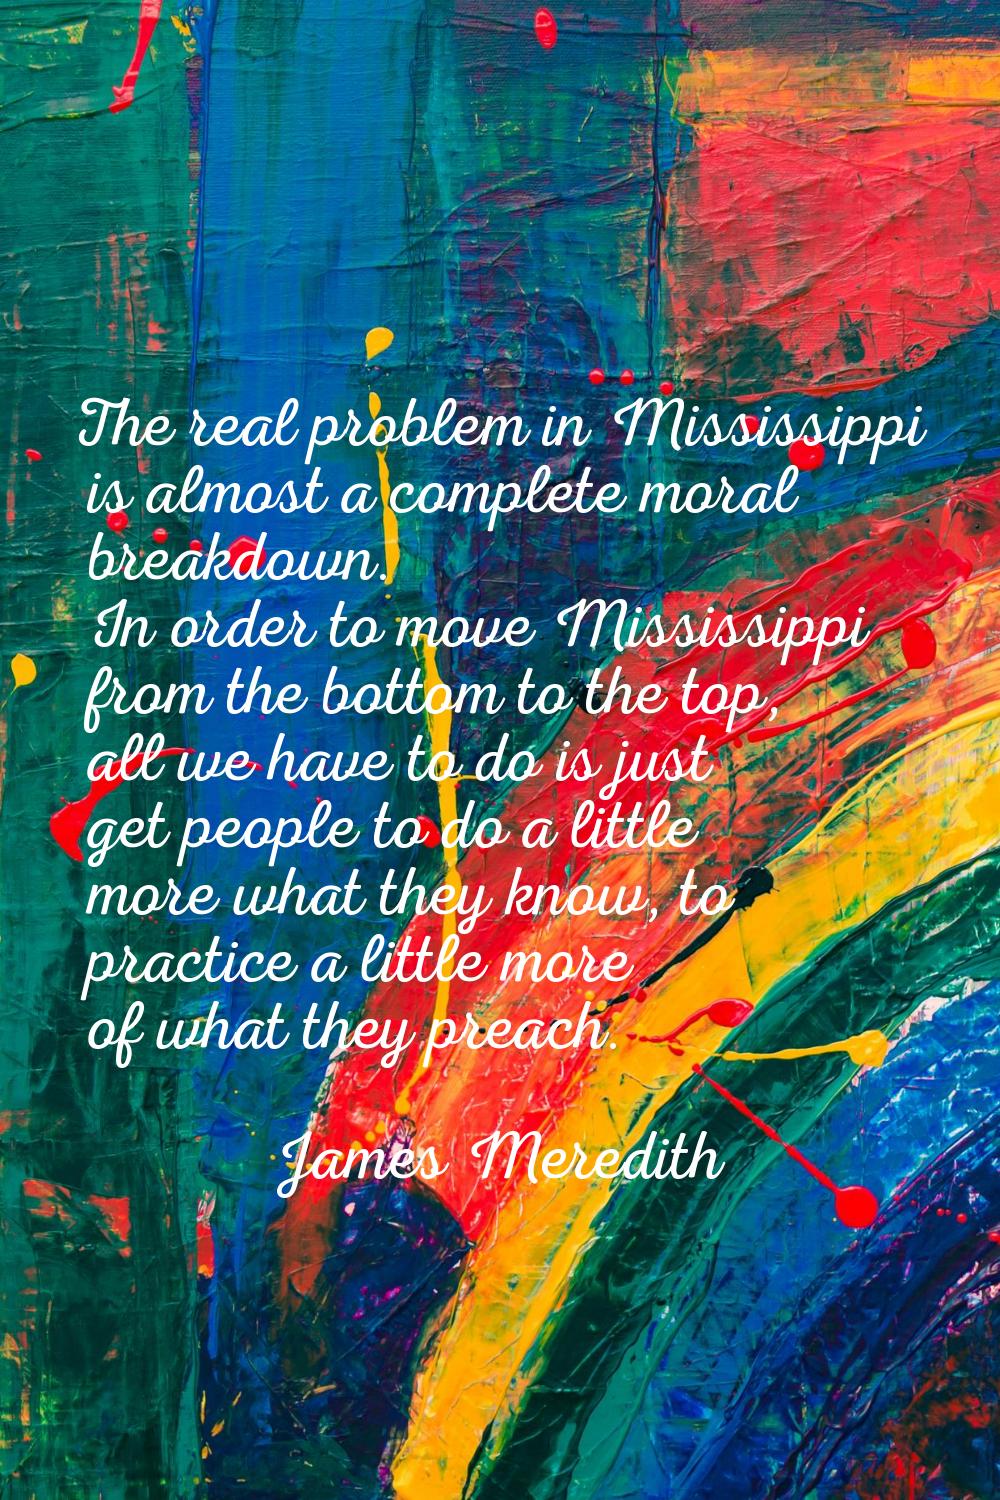 The real problem in Mississippi is almost a complete moral breakdown. In order to move Mississippi 